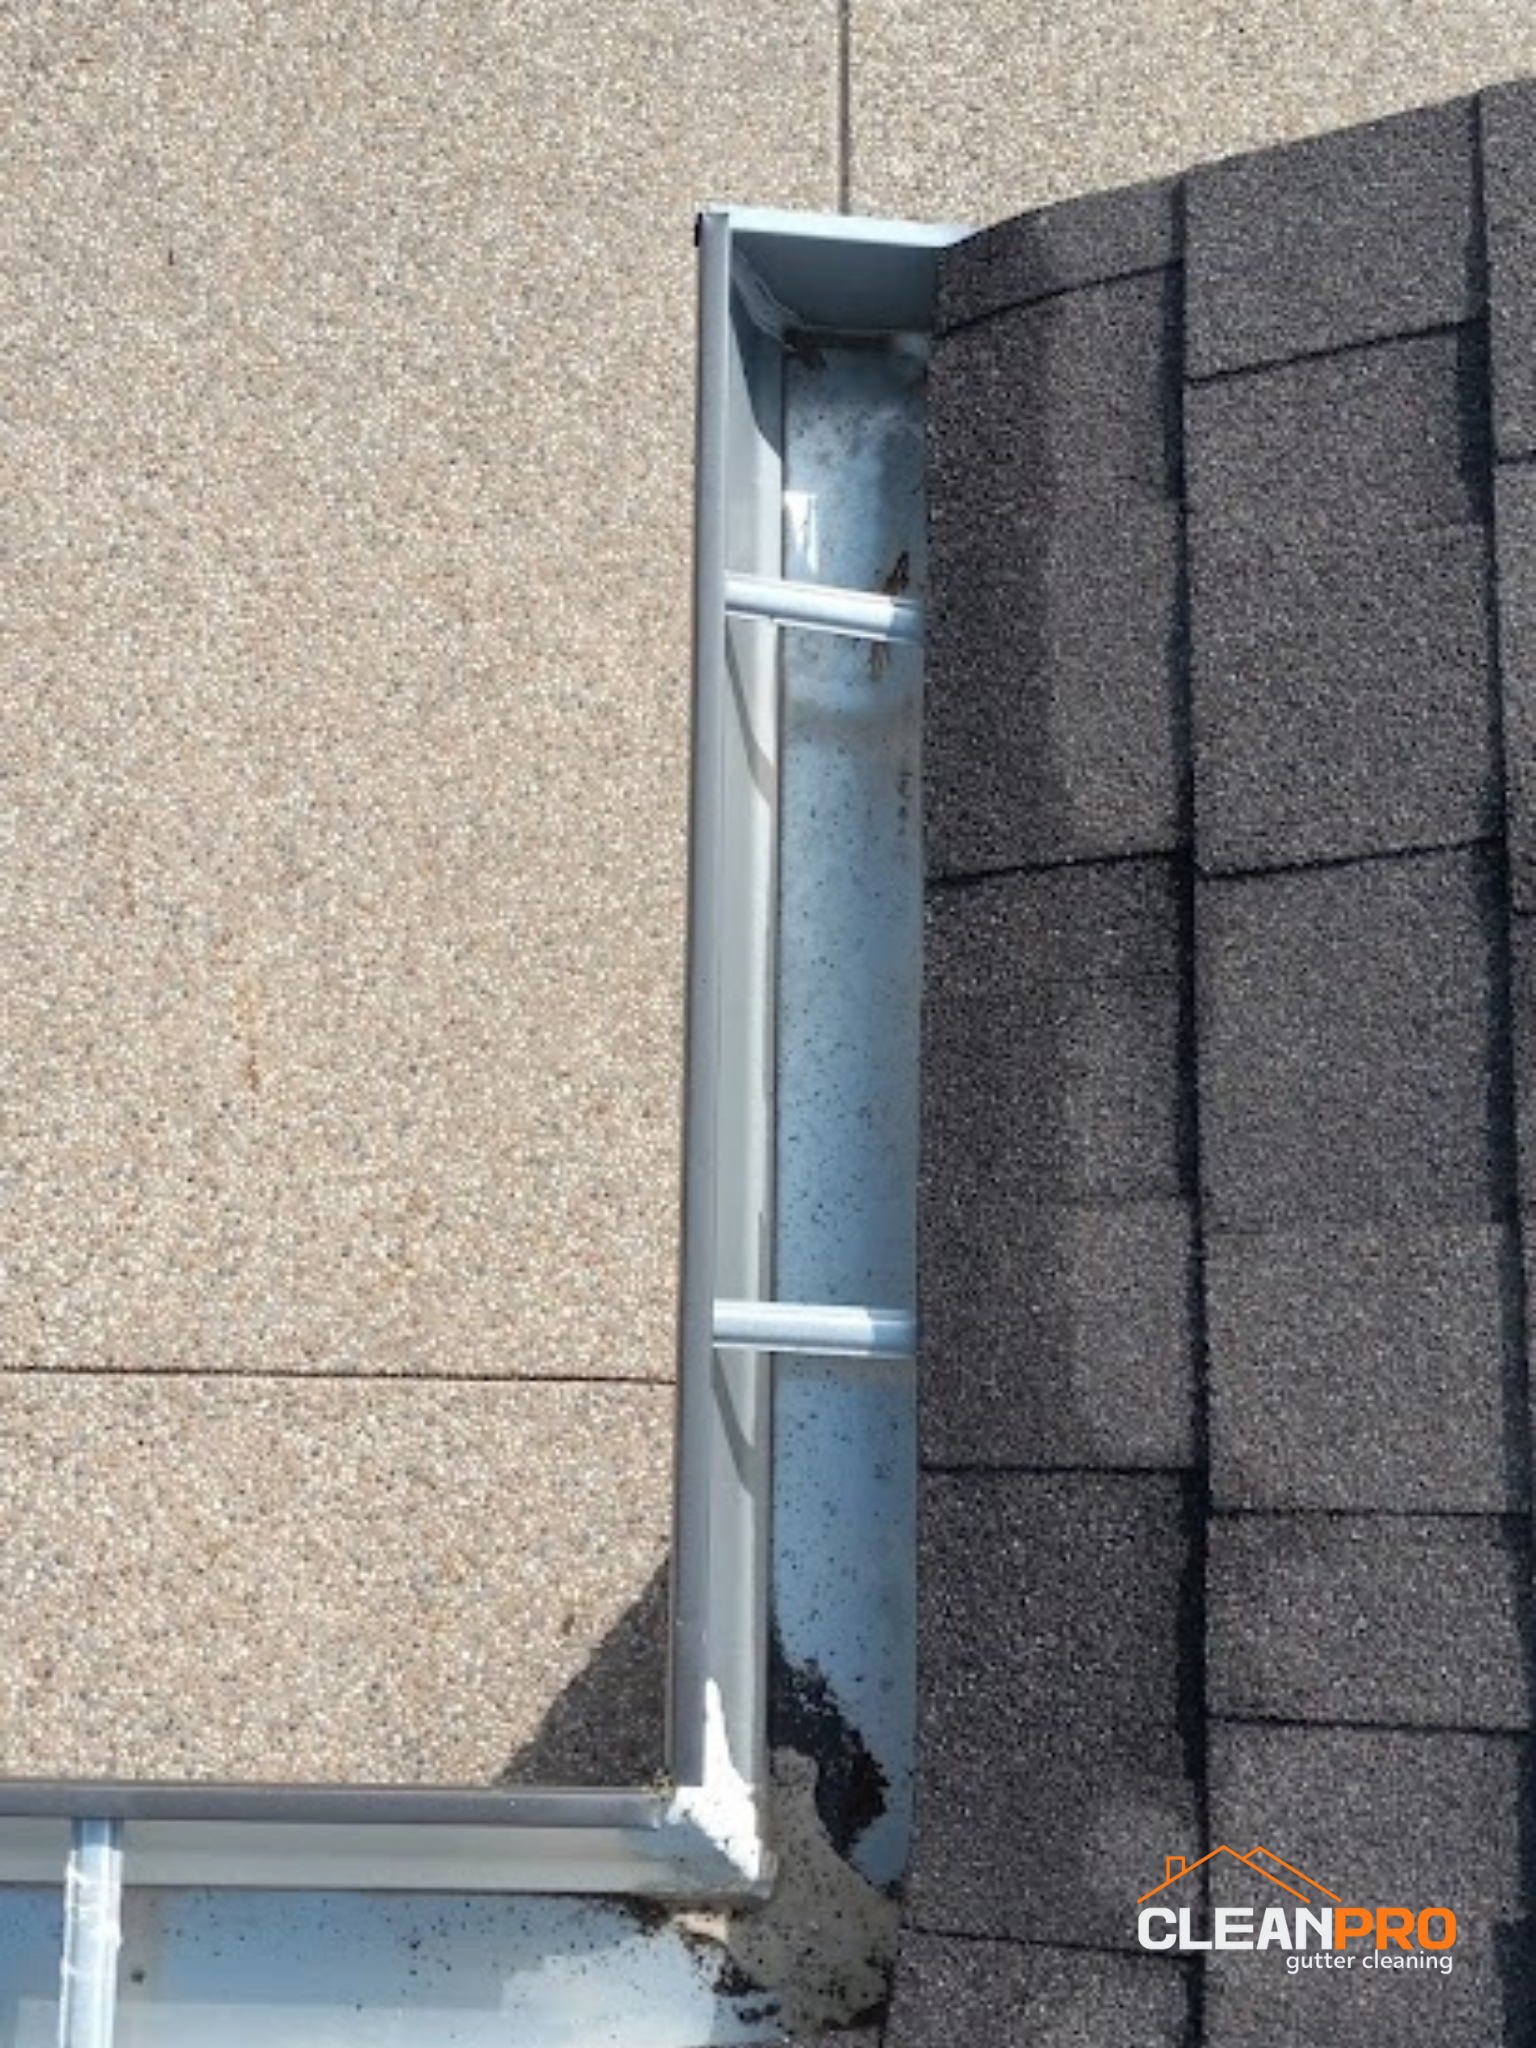 Local Gutter Cleaning in Ann Arbor